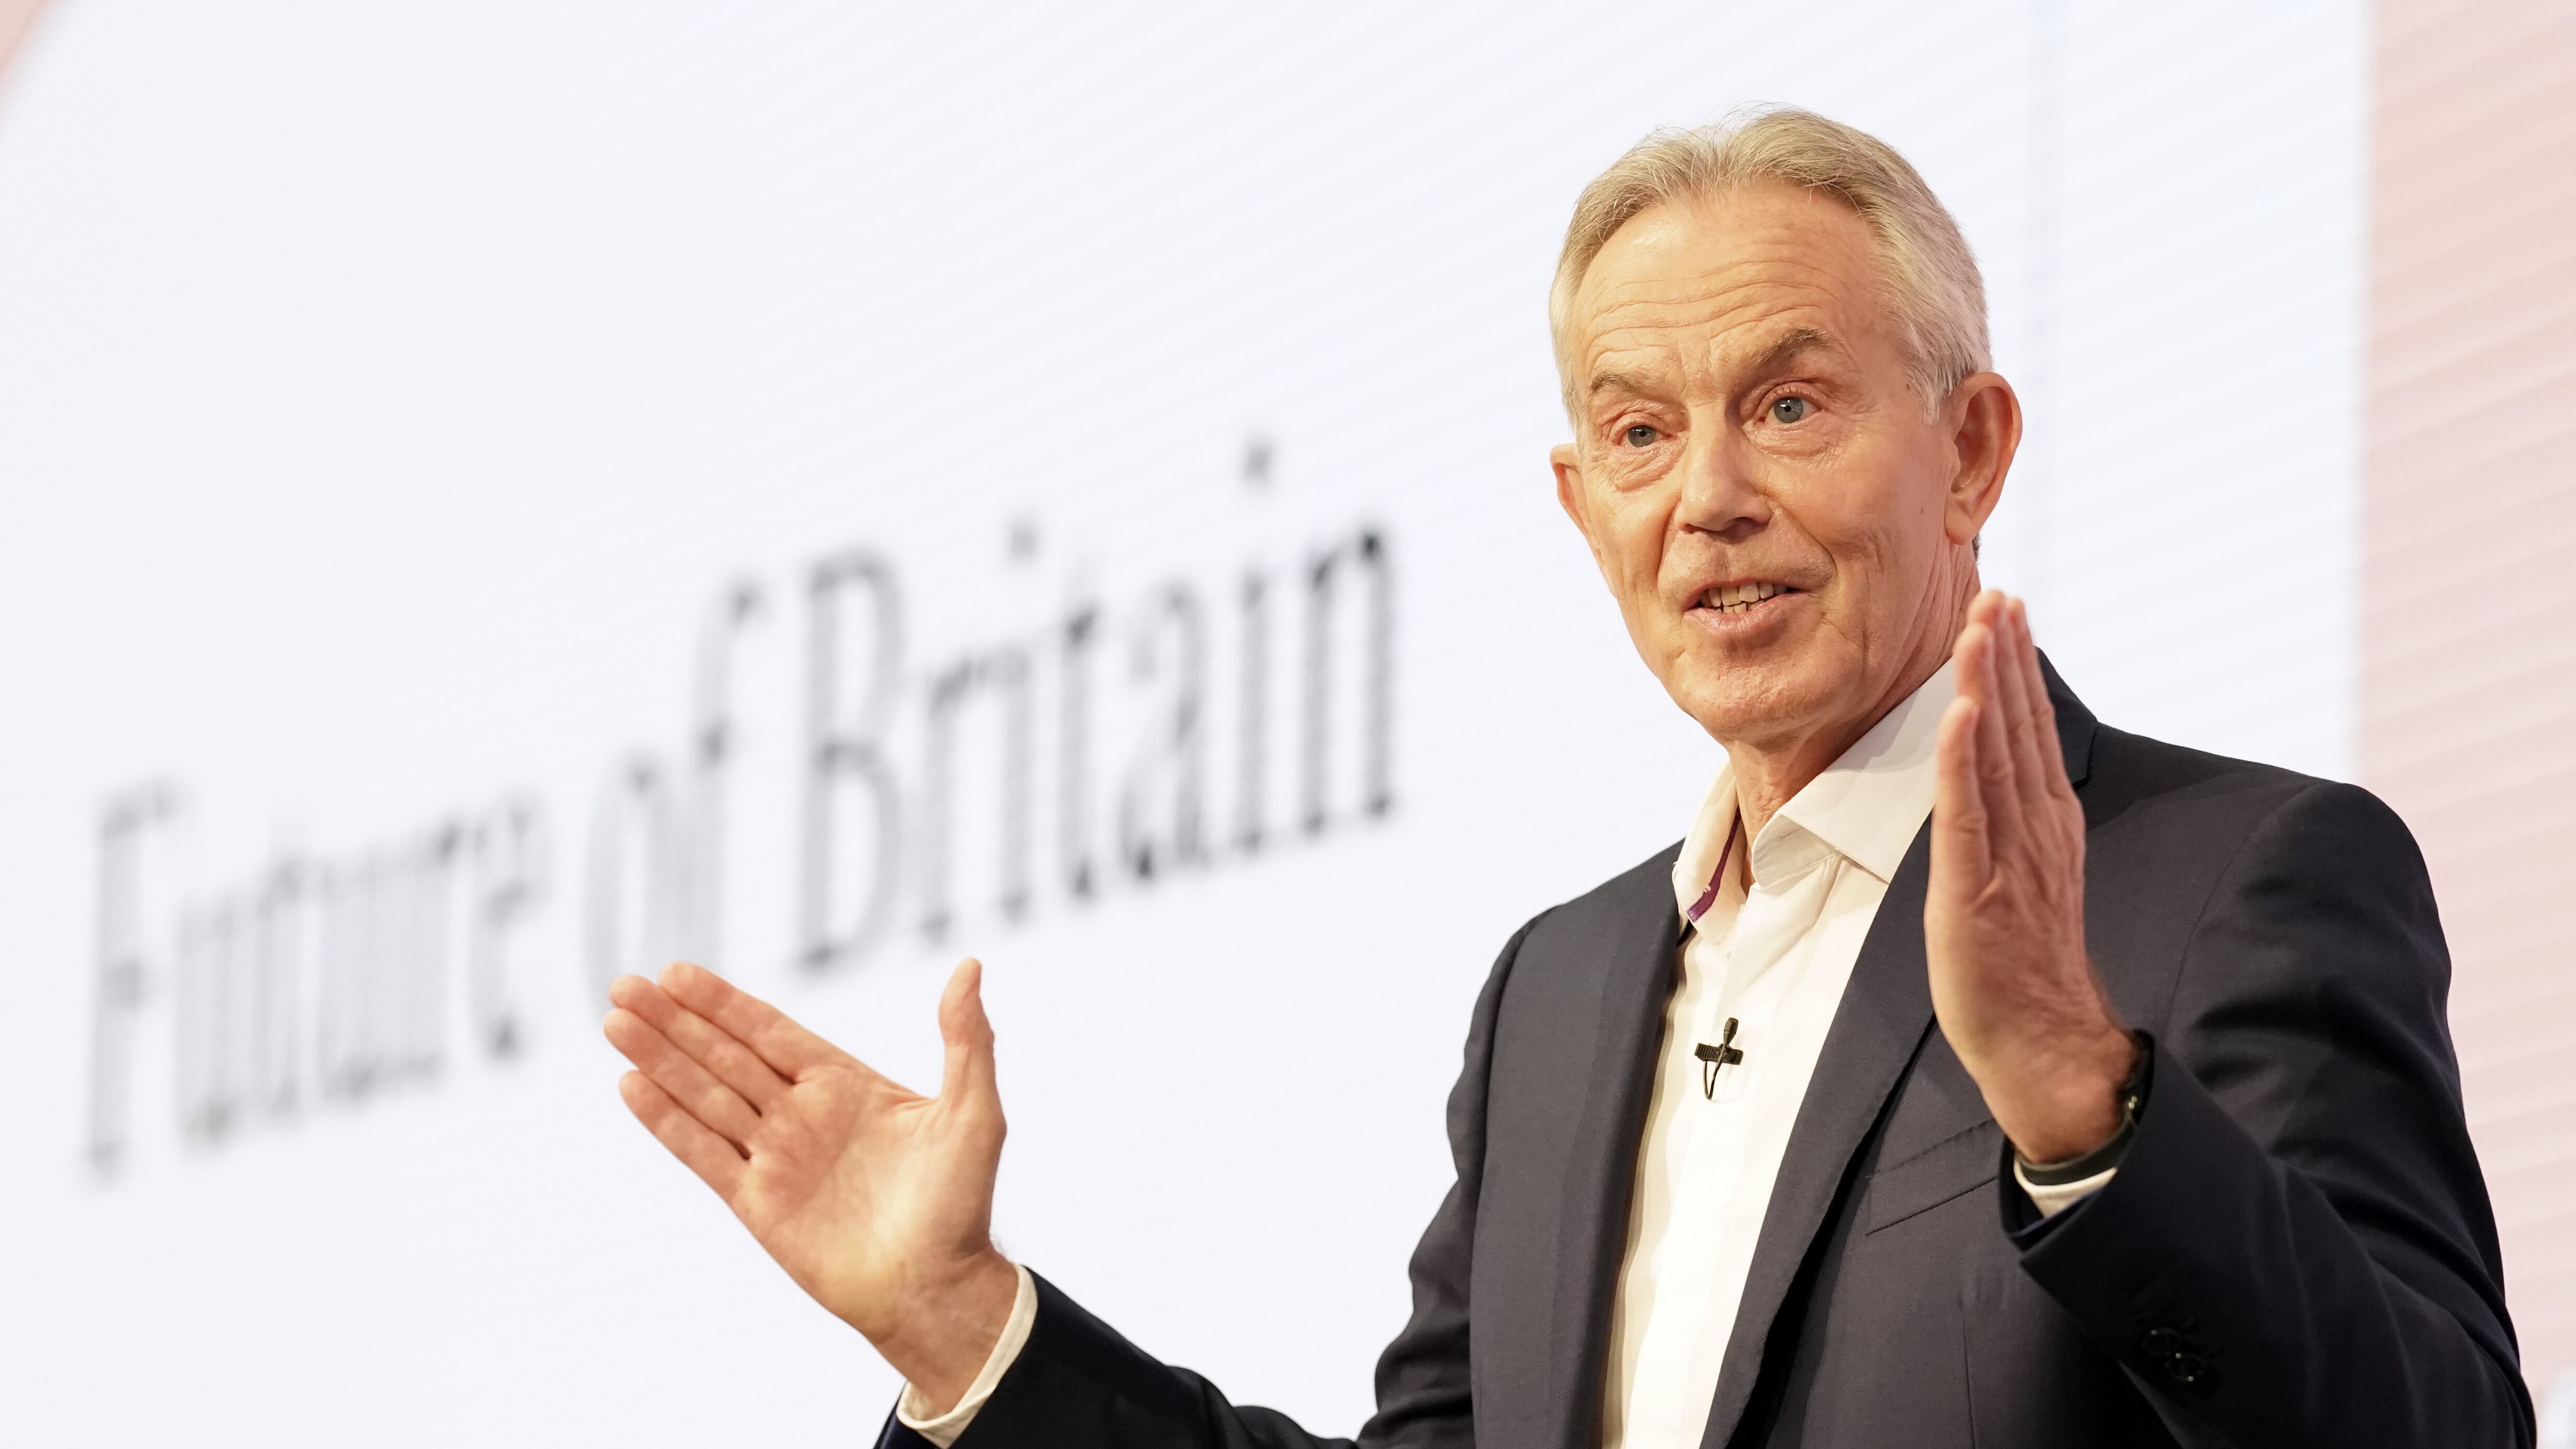 Tony Blair said he often considers how his government could have approached devolution differently